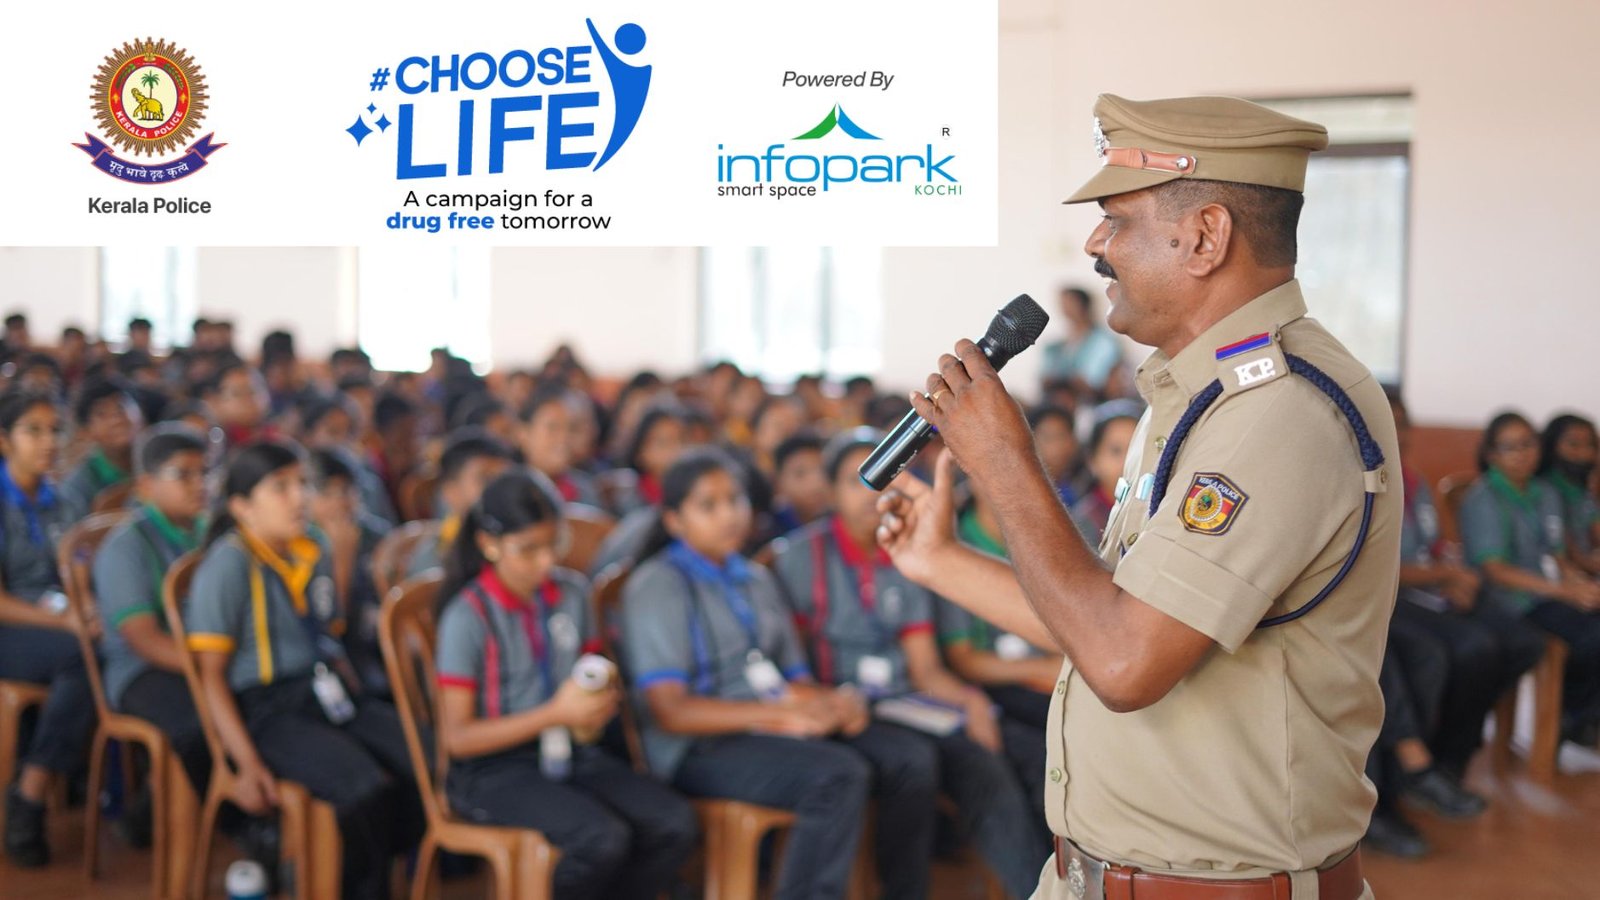 Kochi City Police Sub Inspector Babu John interacting with students of a school in Kochi as part of the anti-drug awareness campaign.